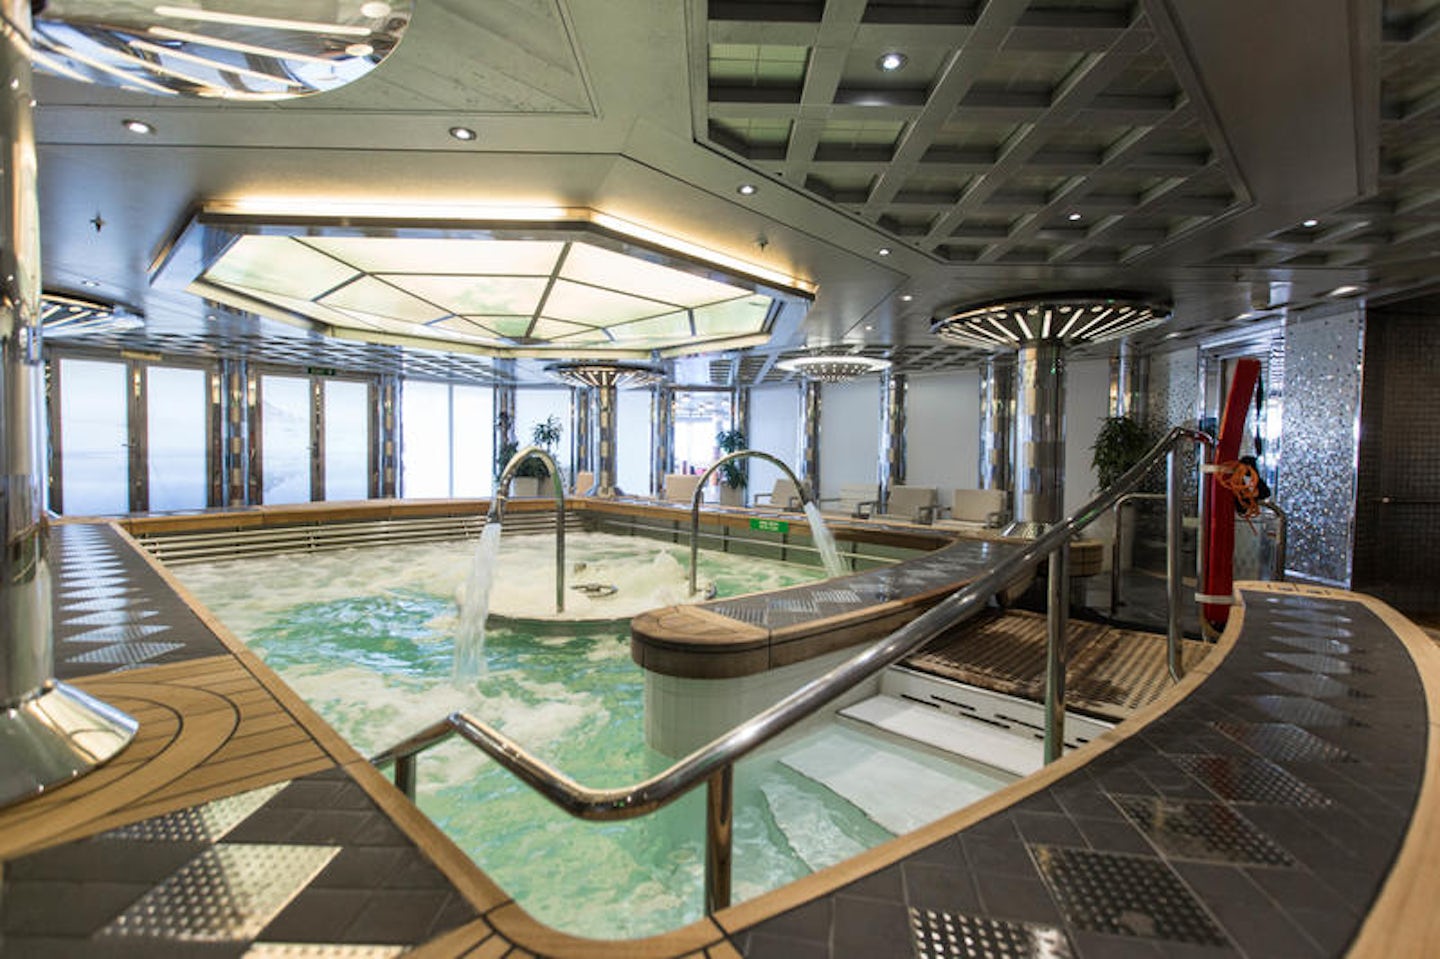 Hydro Pool in The Greenhouse Spa on Nieuw Amsterdam